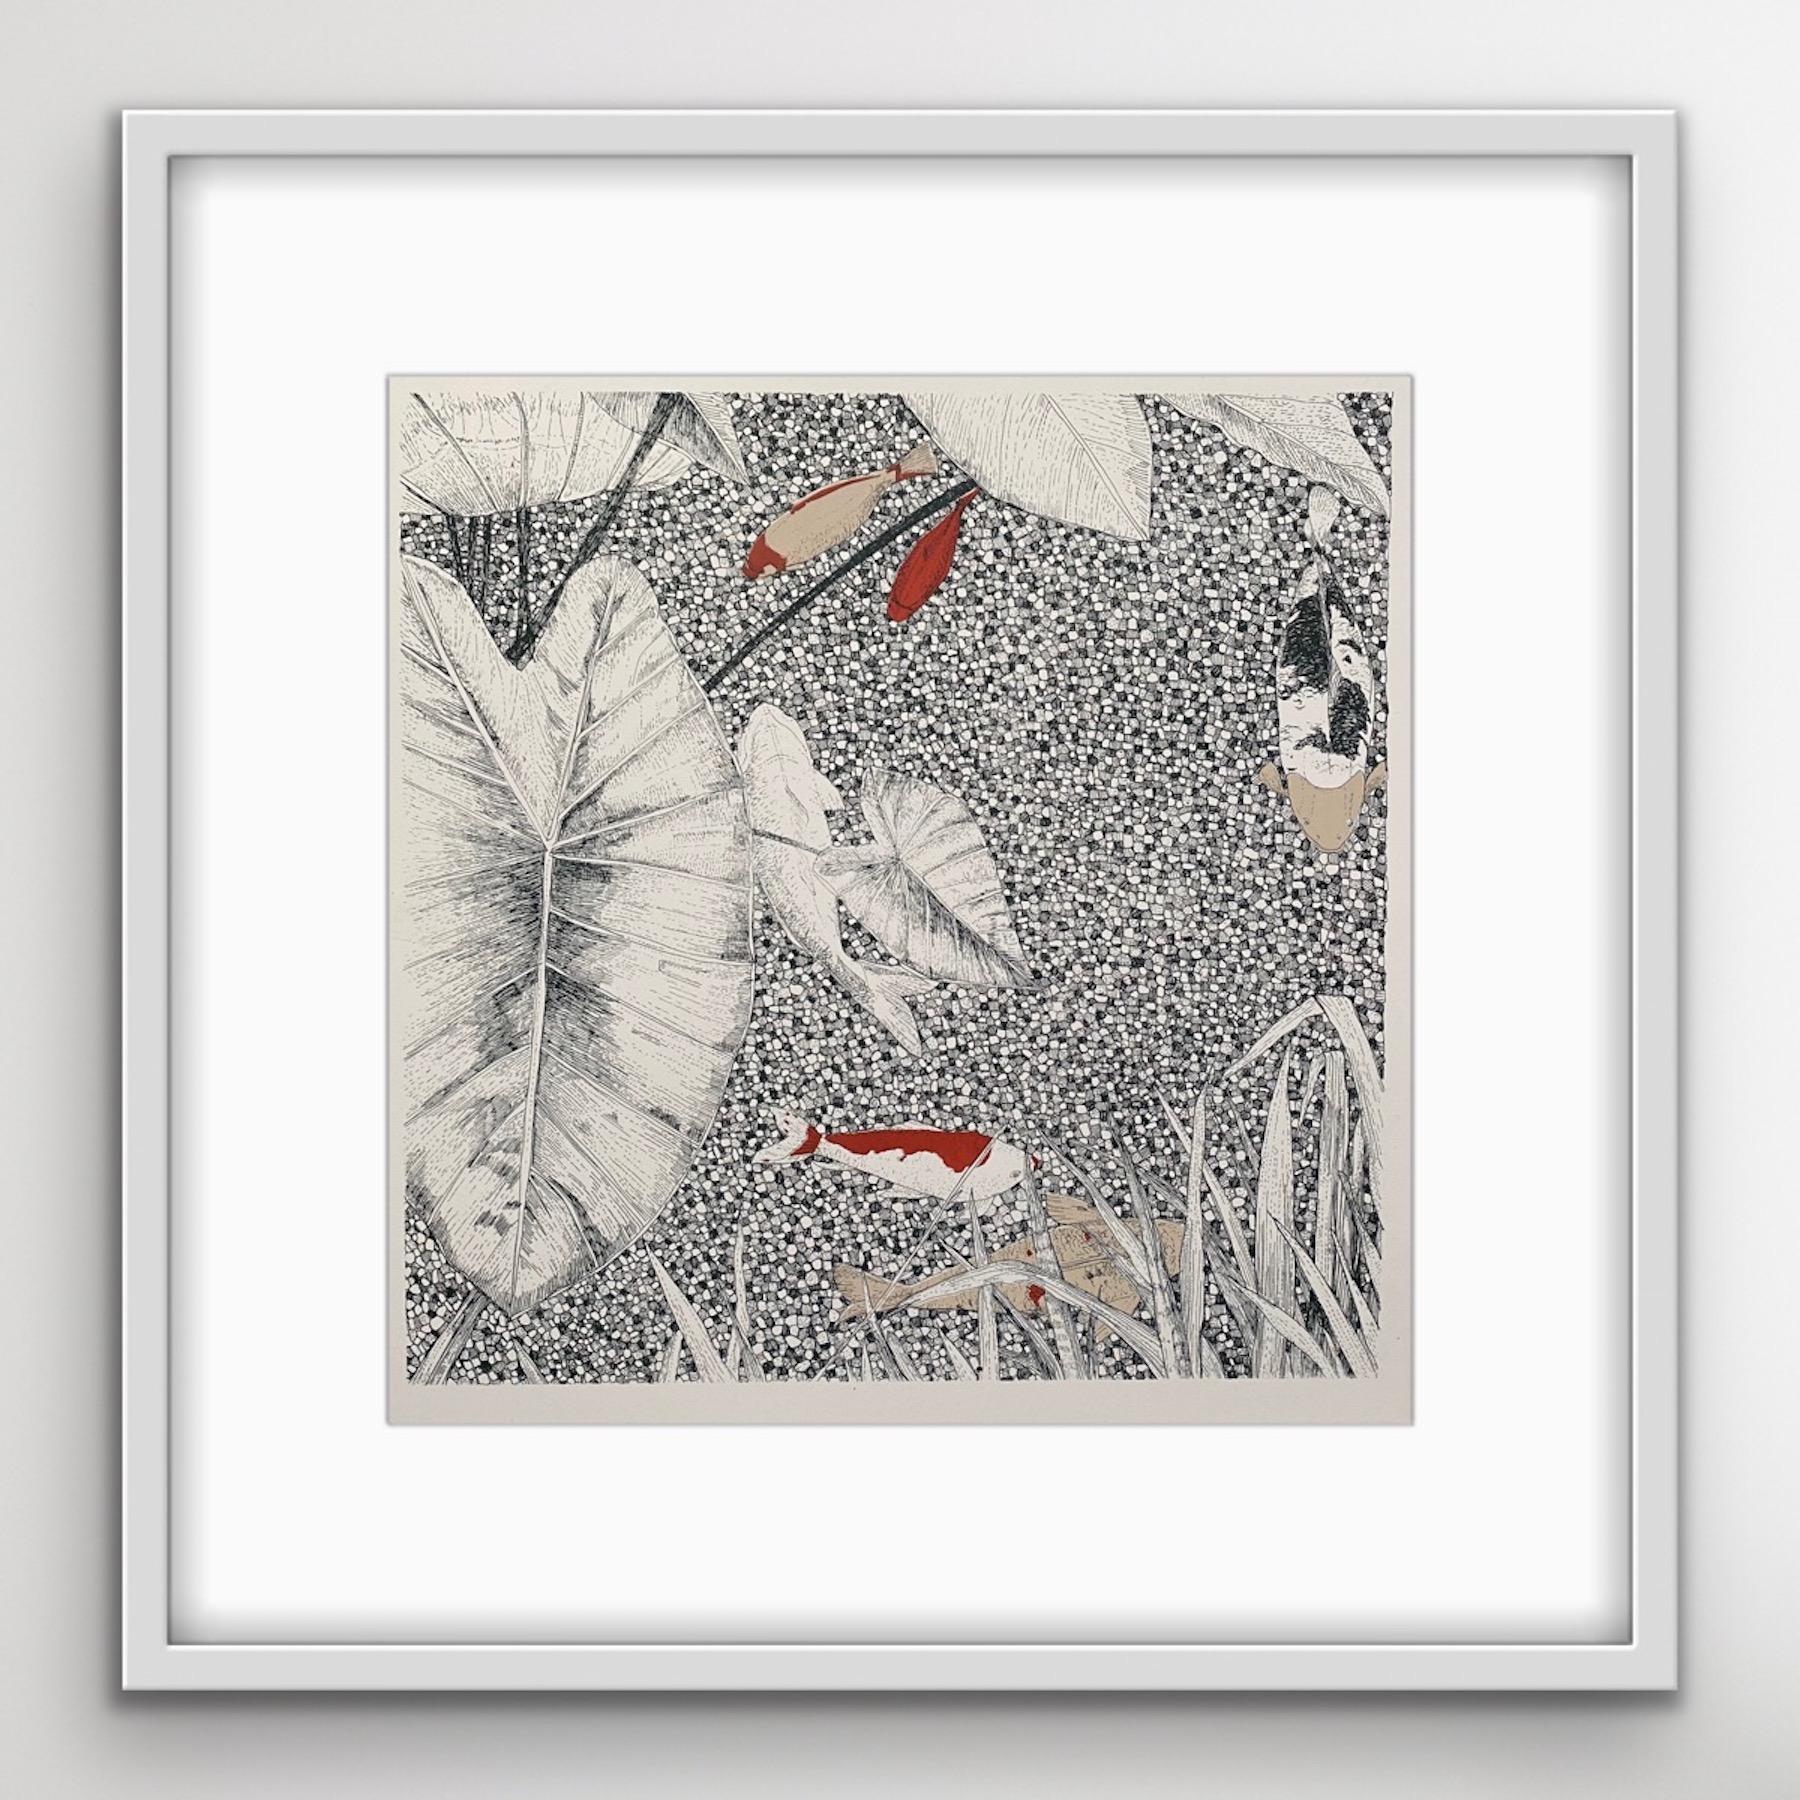 3 colour screen print showing the tranquil habitat of aquatic life in a fish pond framed with botanical foliage.Clare Halifax, artist, joins Wychwood Art selling art online and in their art gallery in Deddington. Clare Halifax is offering exclusive